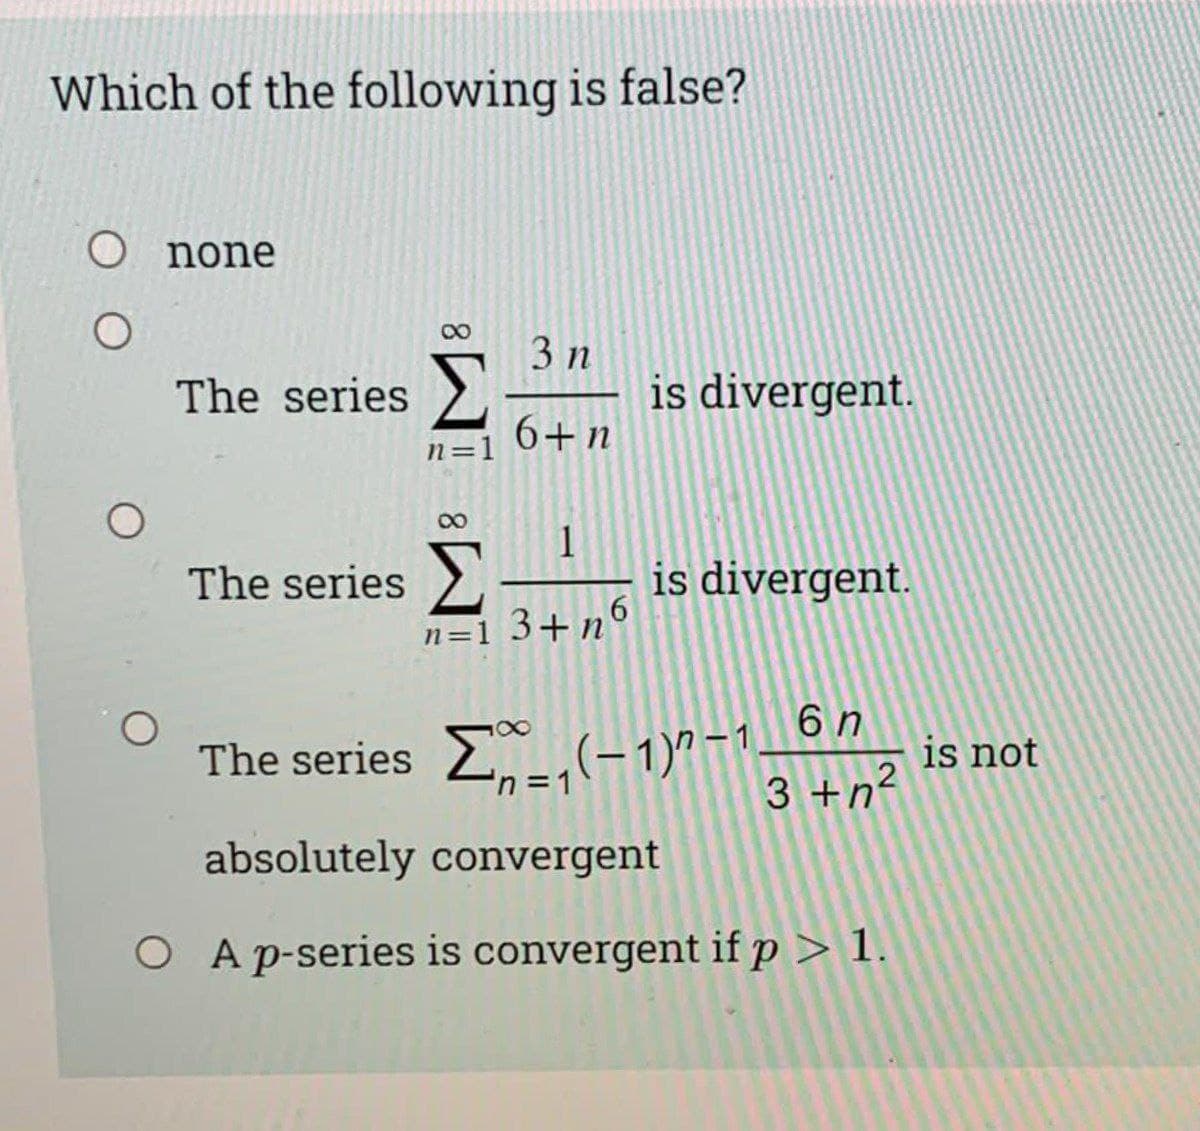 Which of the following is false?
O none
3 п
is divergent.
6+n
The series >
n=1
The series
is divergent.
n=1 3+n6
6 n
The series (-1)"-1
3 +n²
is not
absolutely convergent
O A p-series is convergent if p > 1.
1.
8.
